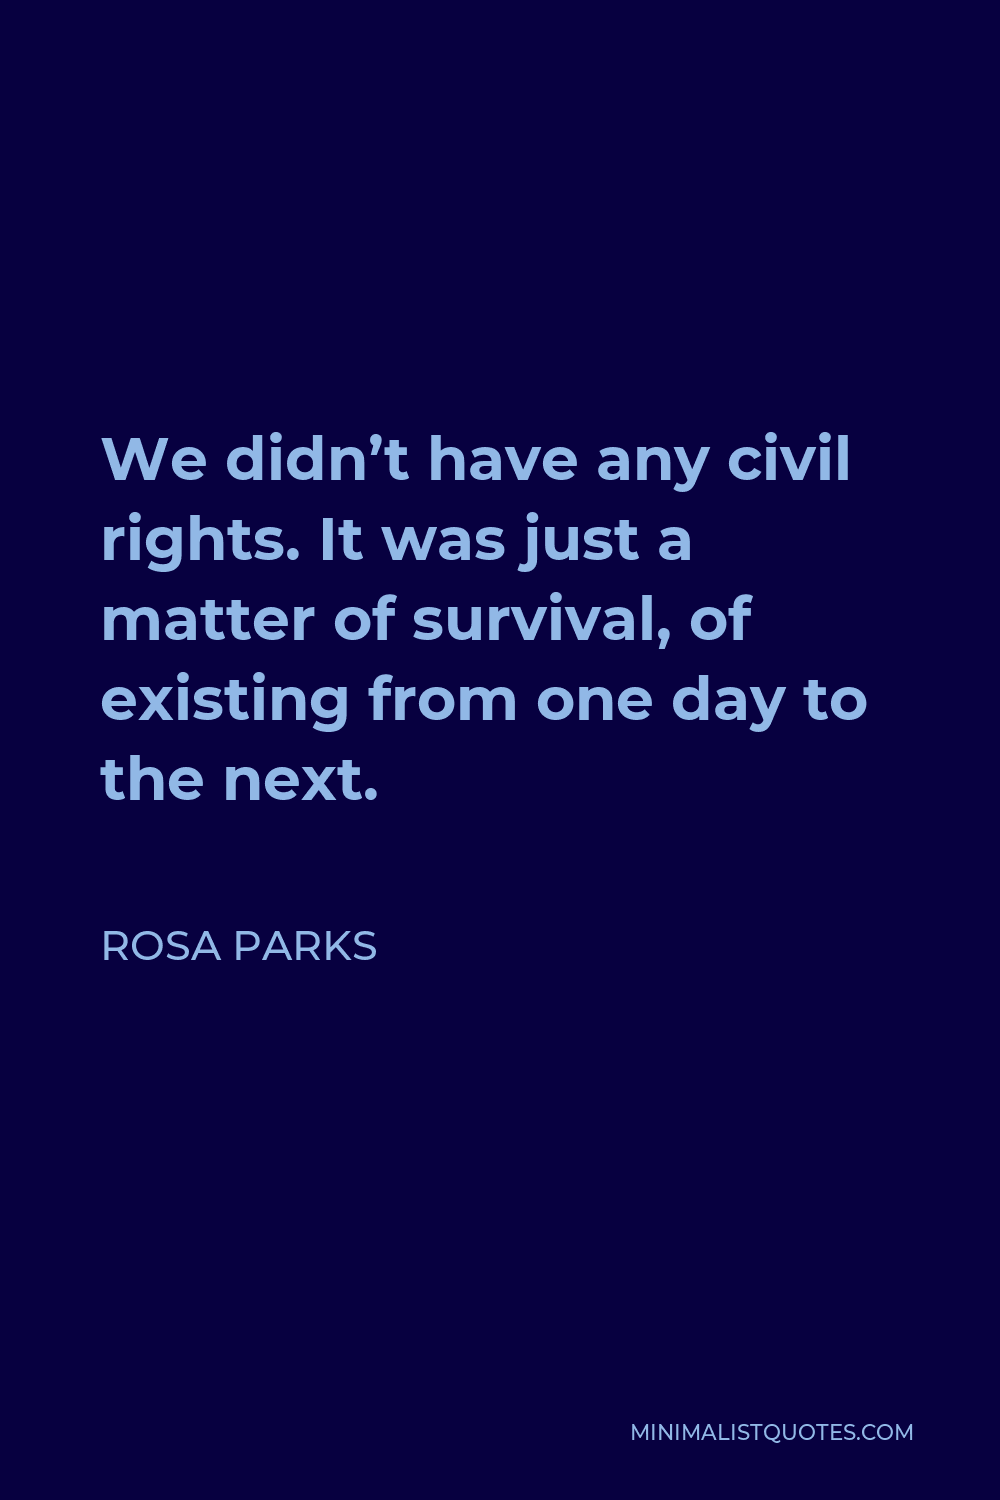 Rosa Parks Quote - We didn’t have any civil rights. It was just a matter of survival, of existing from one day to the next.